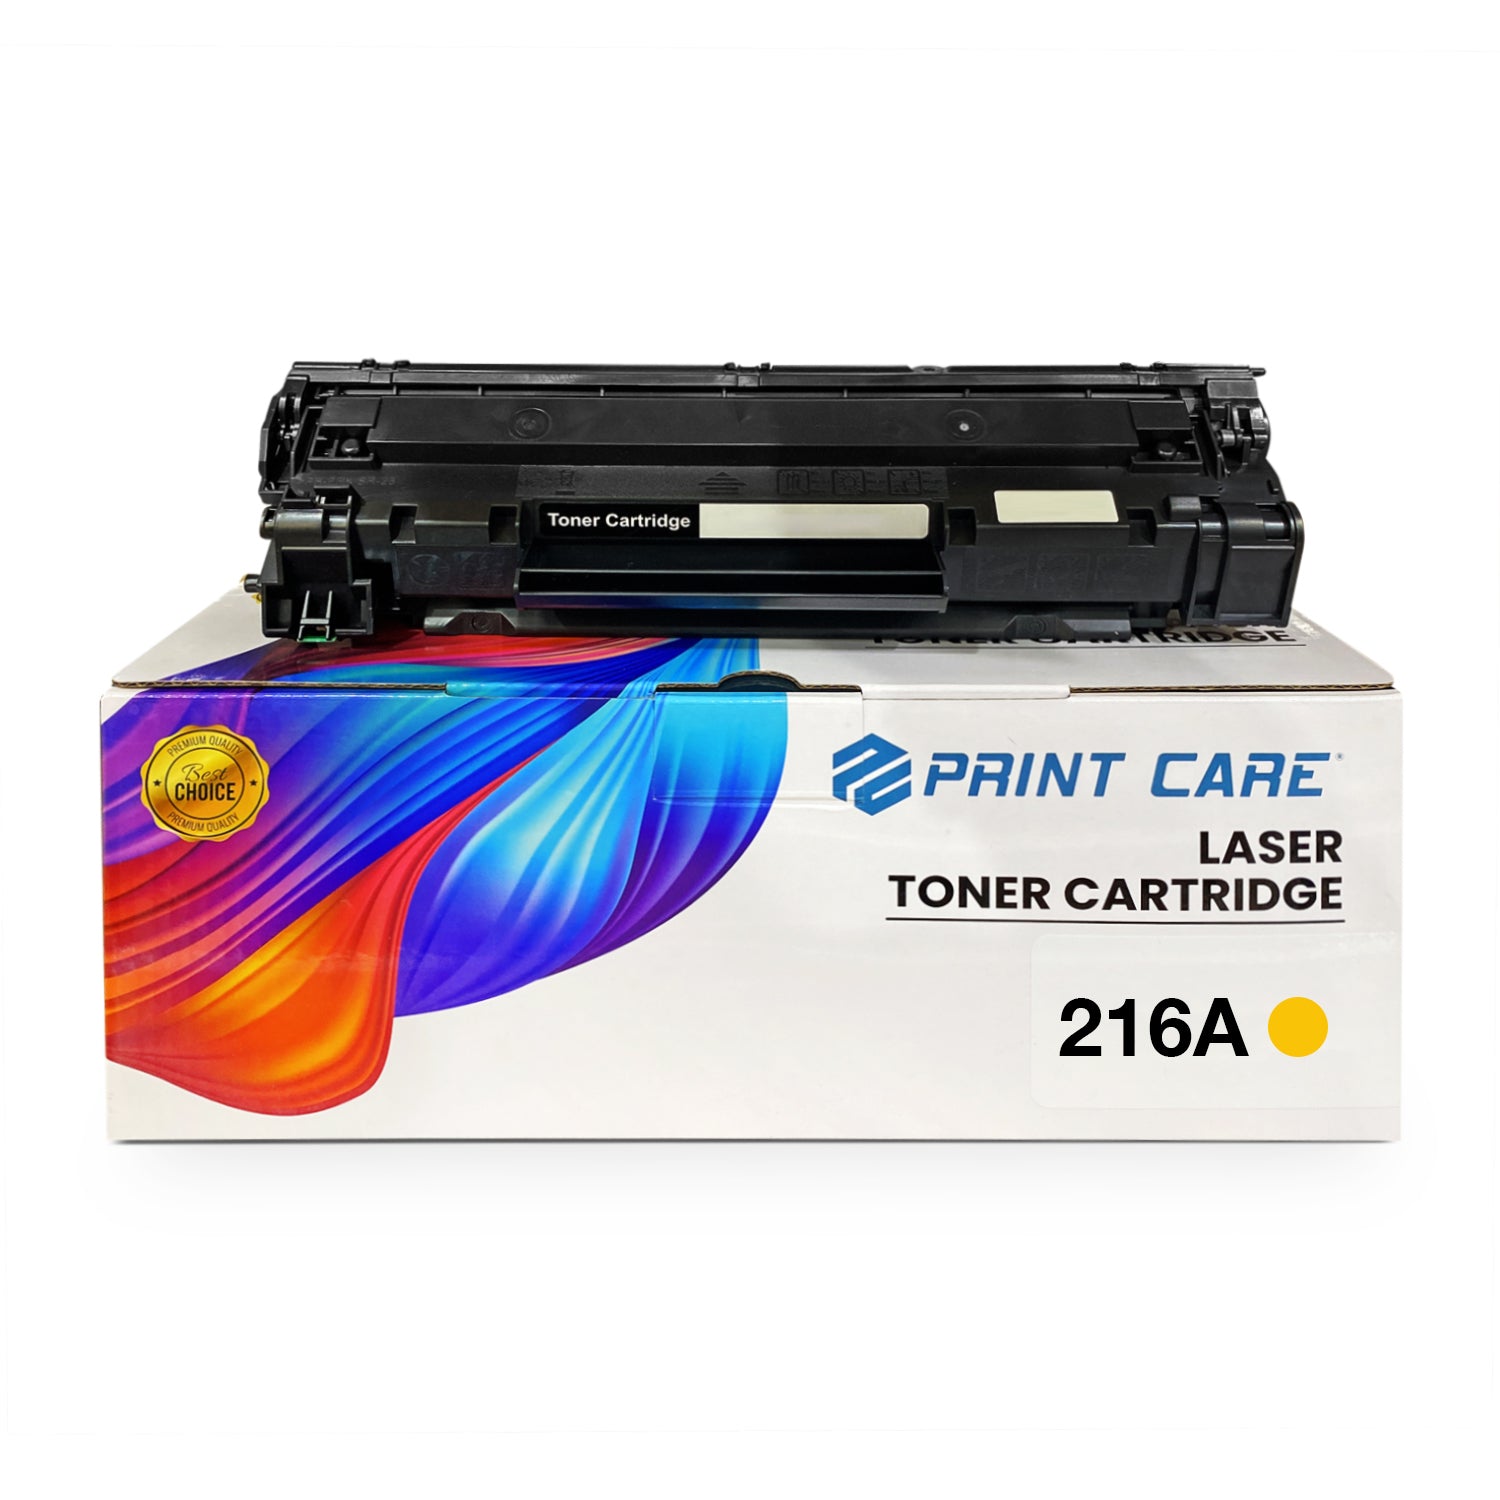 Print Care 216A Yellow Color – 850 pages / Yellow Color / Toner Cartridge – (W2412A)